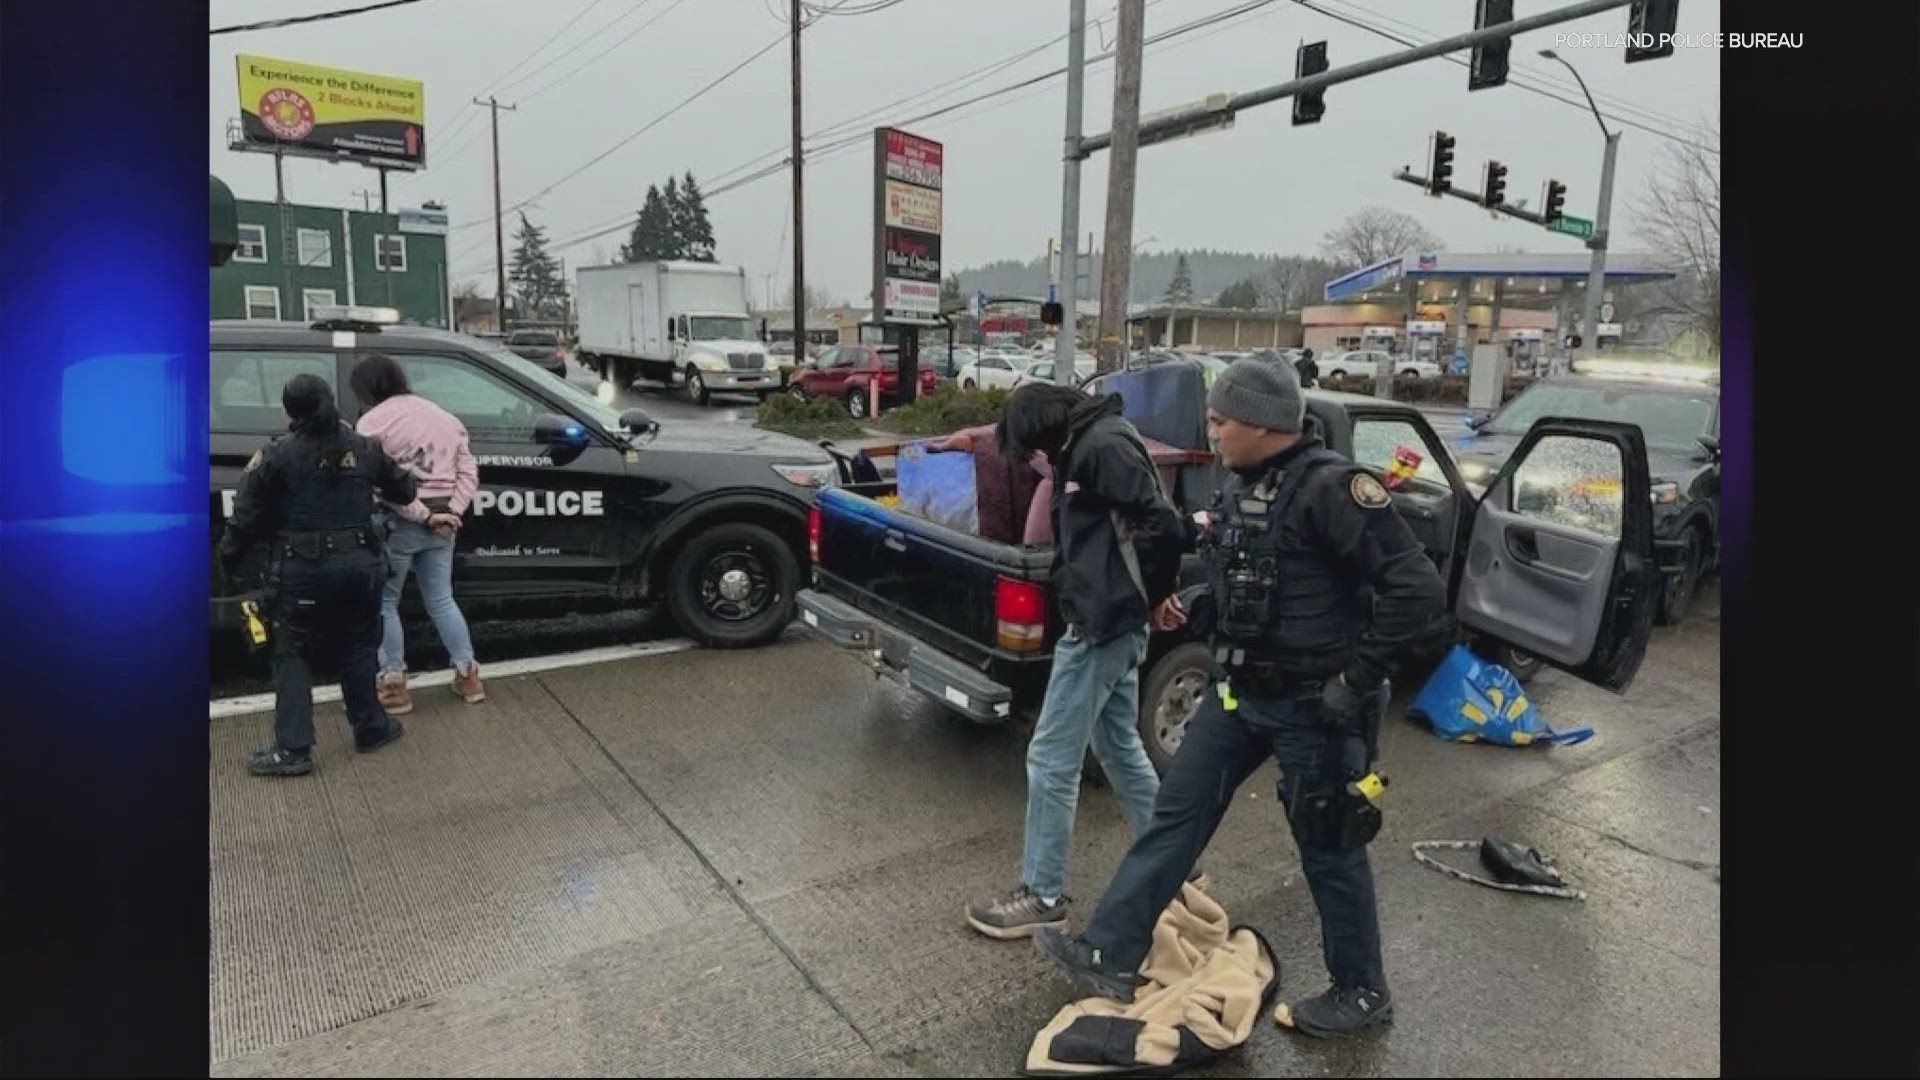 Portland police along with Multnomah County Sheriff's deputies conducted a retail theft operation this weekend.